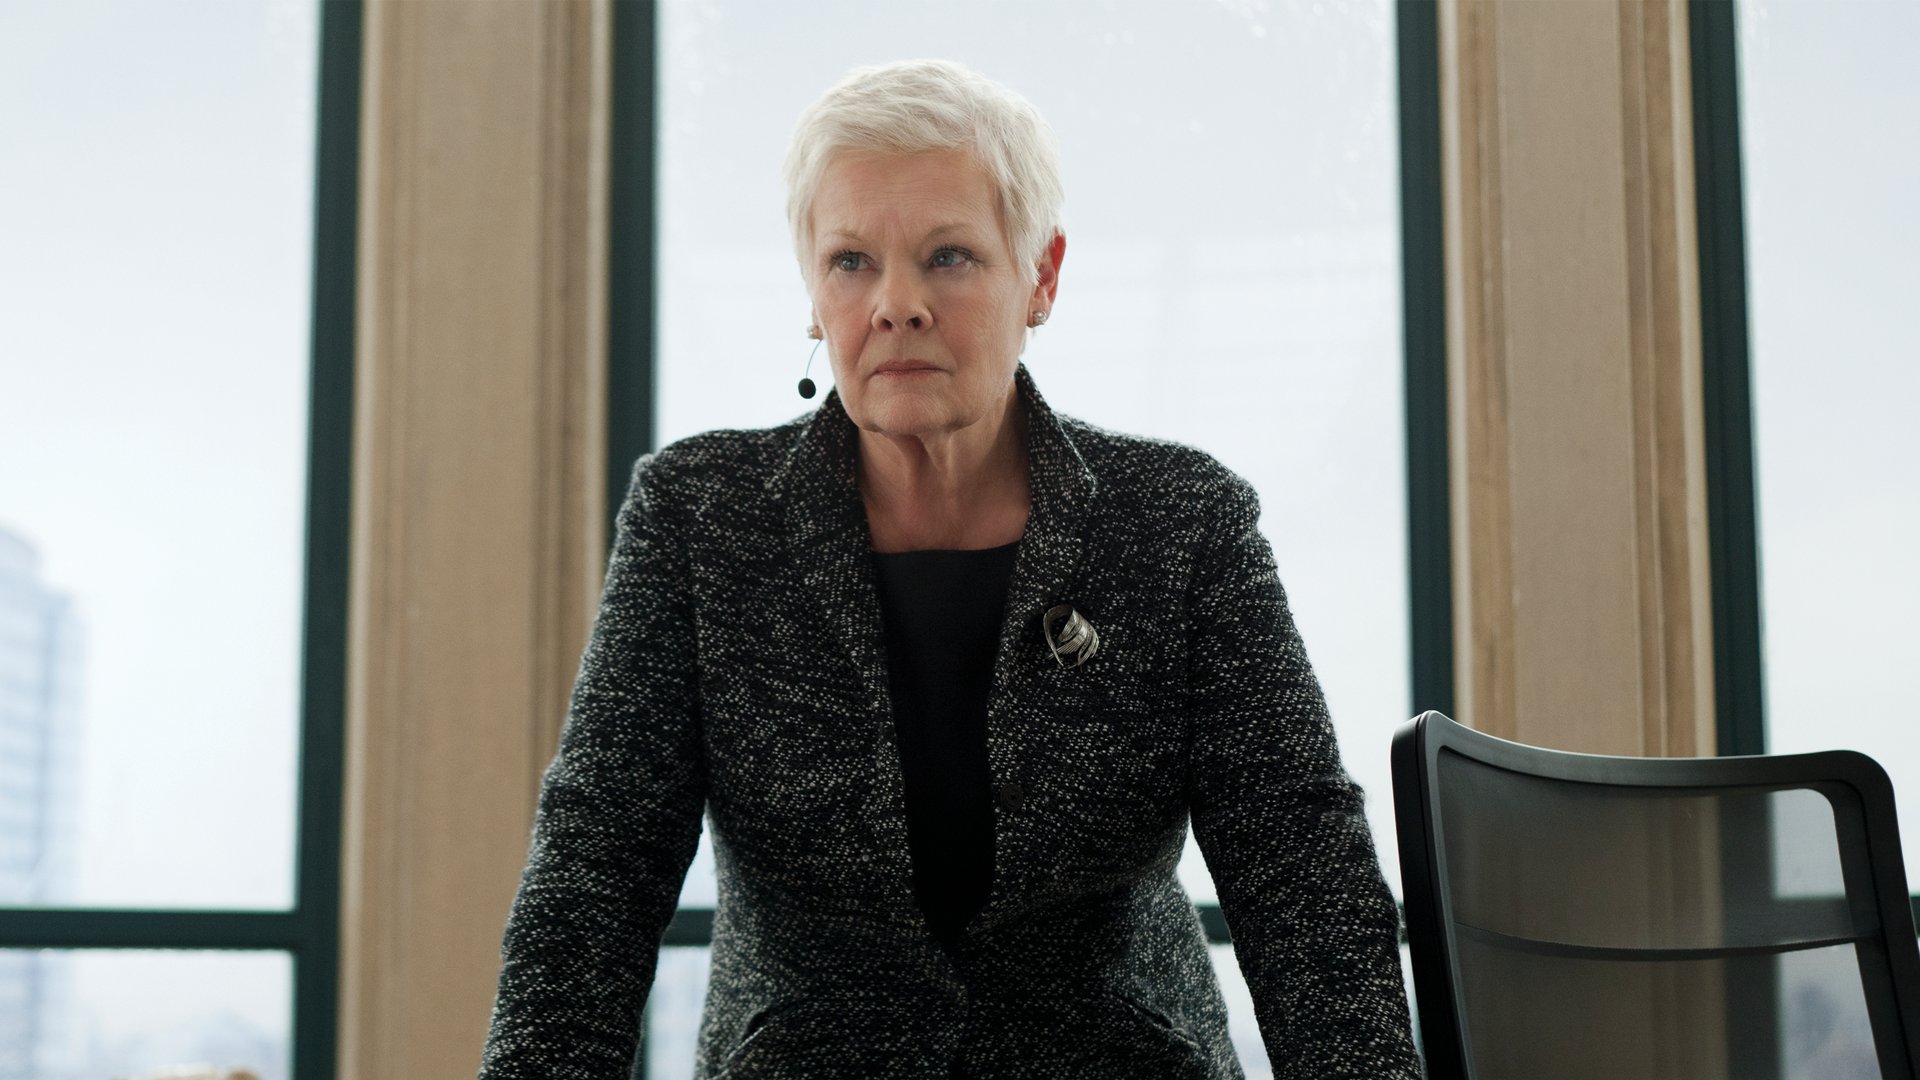 From M to Lady Macbeth, Dame Judi Dench is an absolute gift. Happy birthday! 